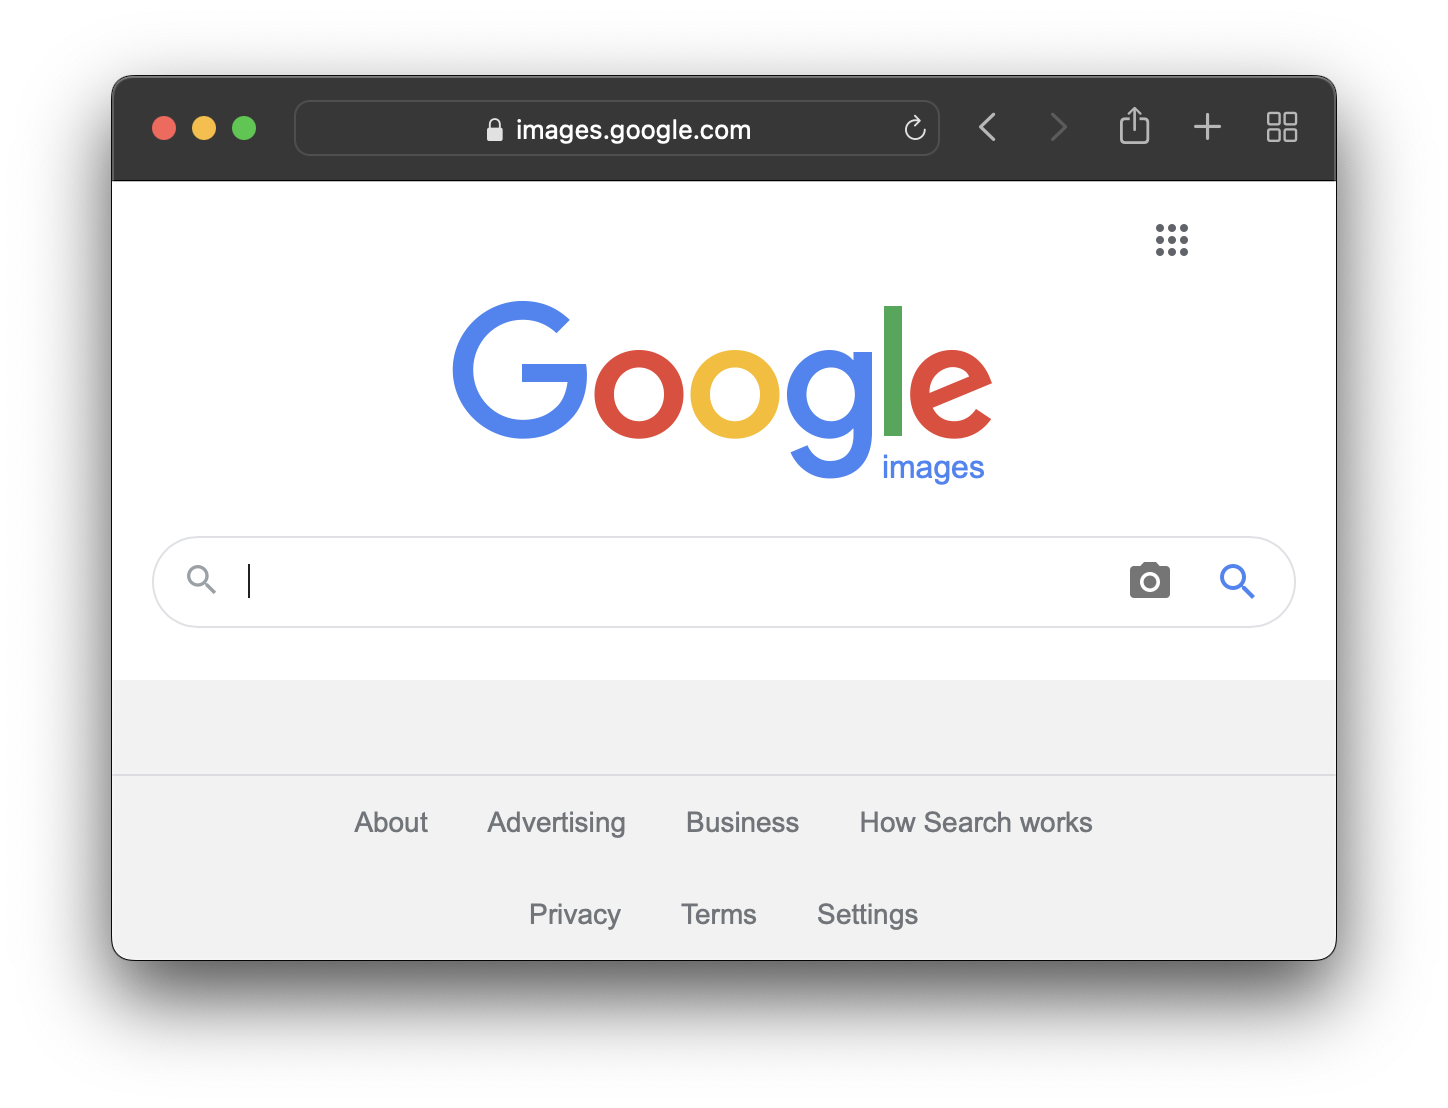 Use Google Images to perform Reverse Image Search